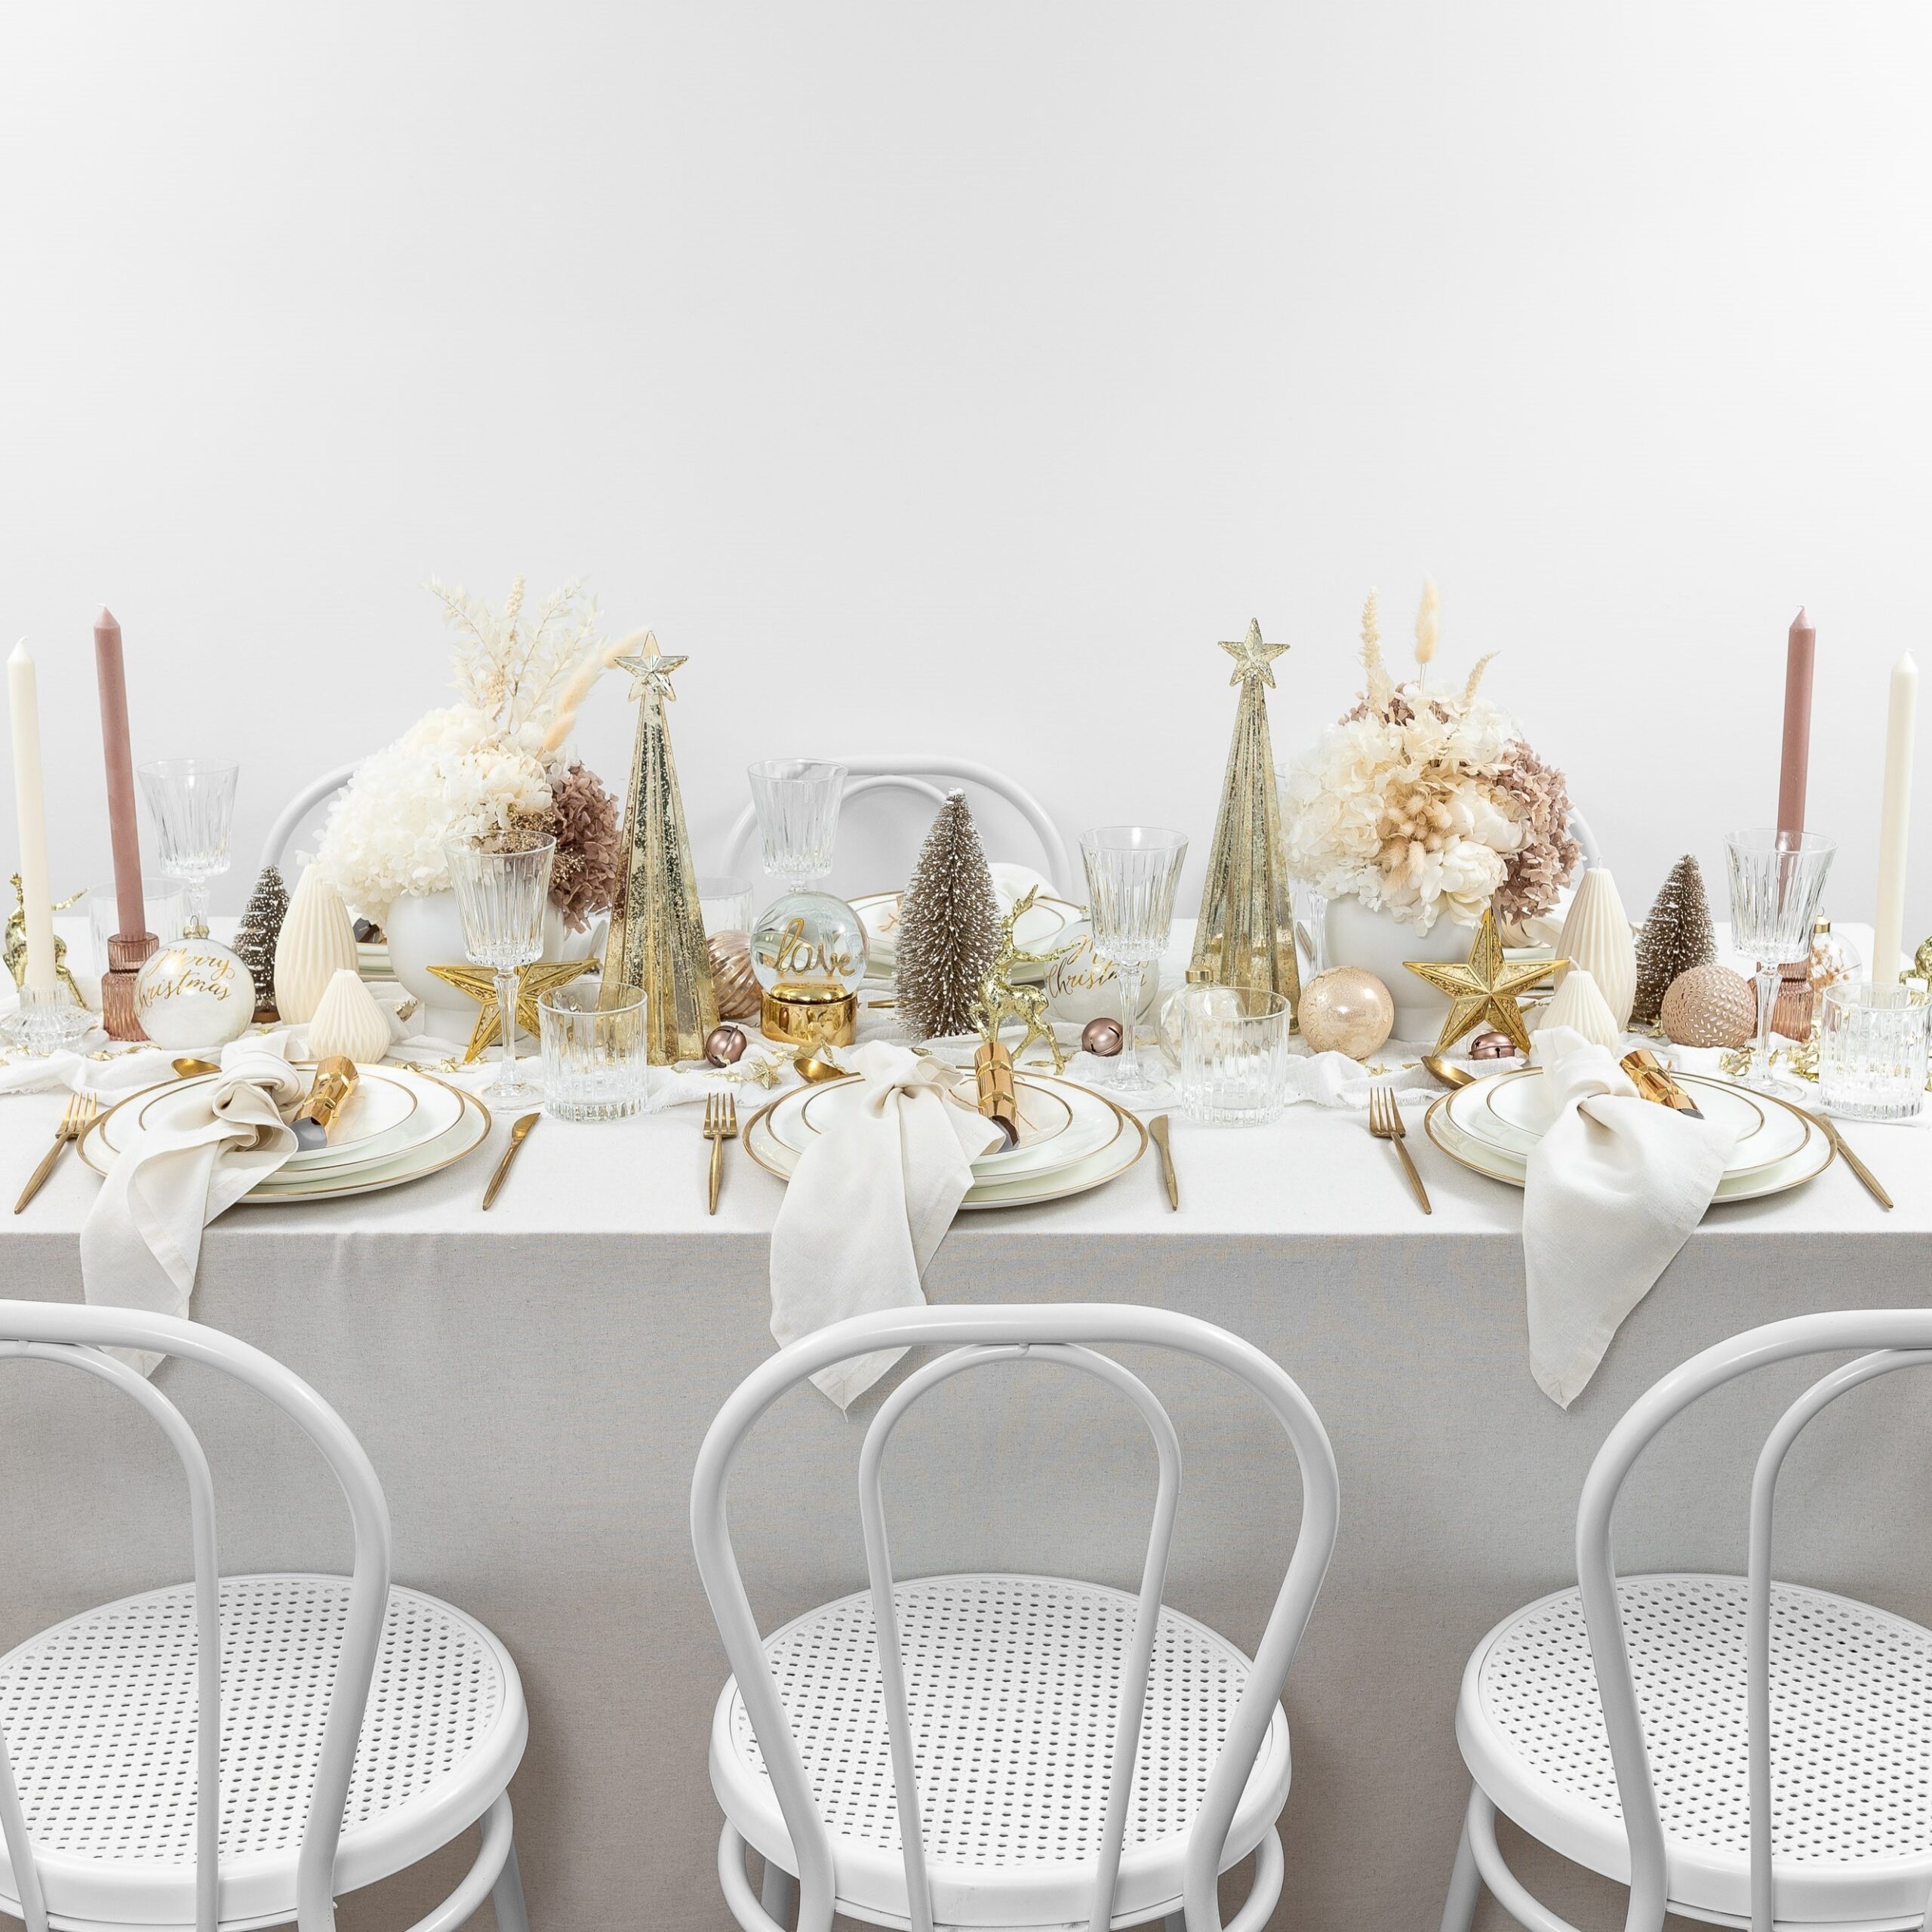 The Golden Christmas Tablescape